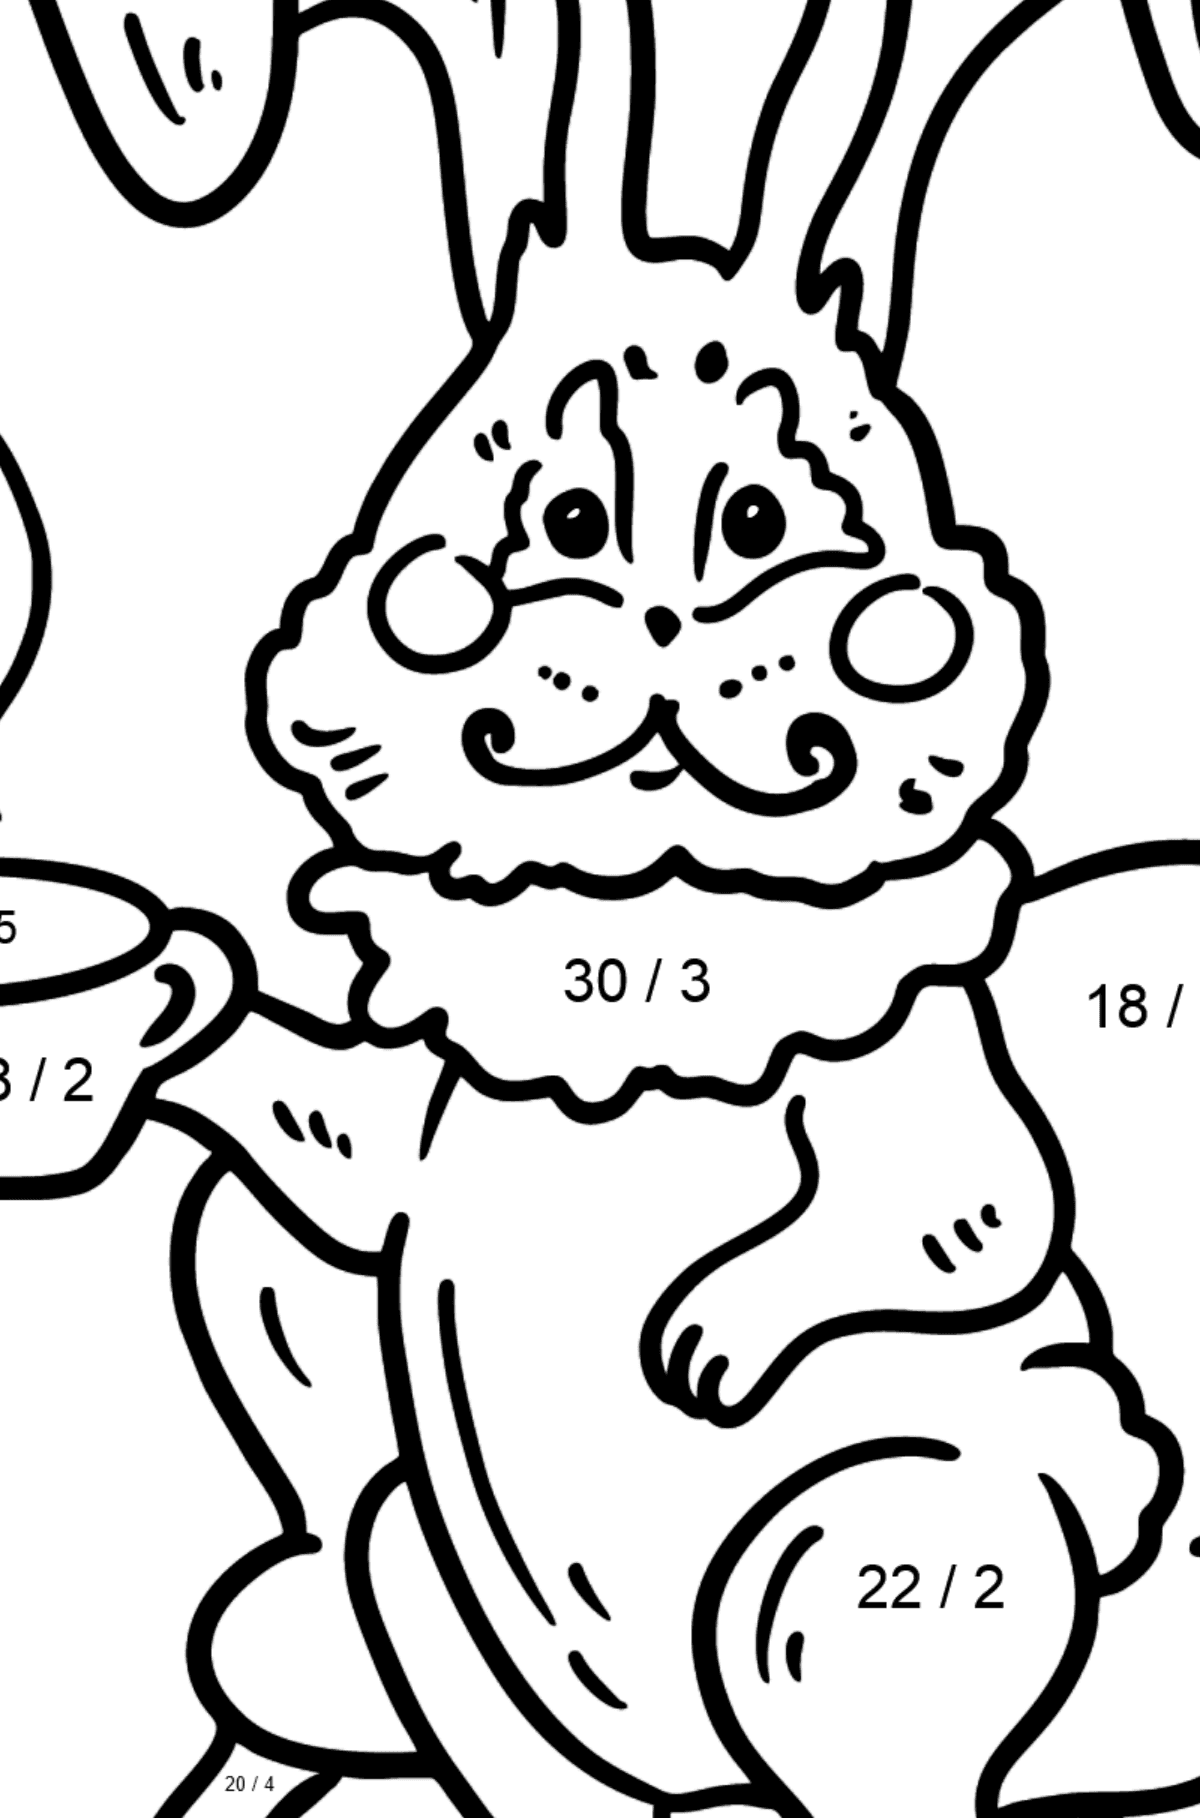 Bunny Sitting coloring page - Math Coloring - Division for Kids